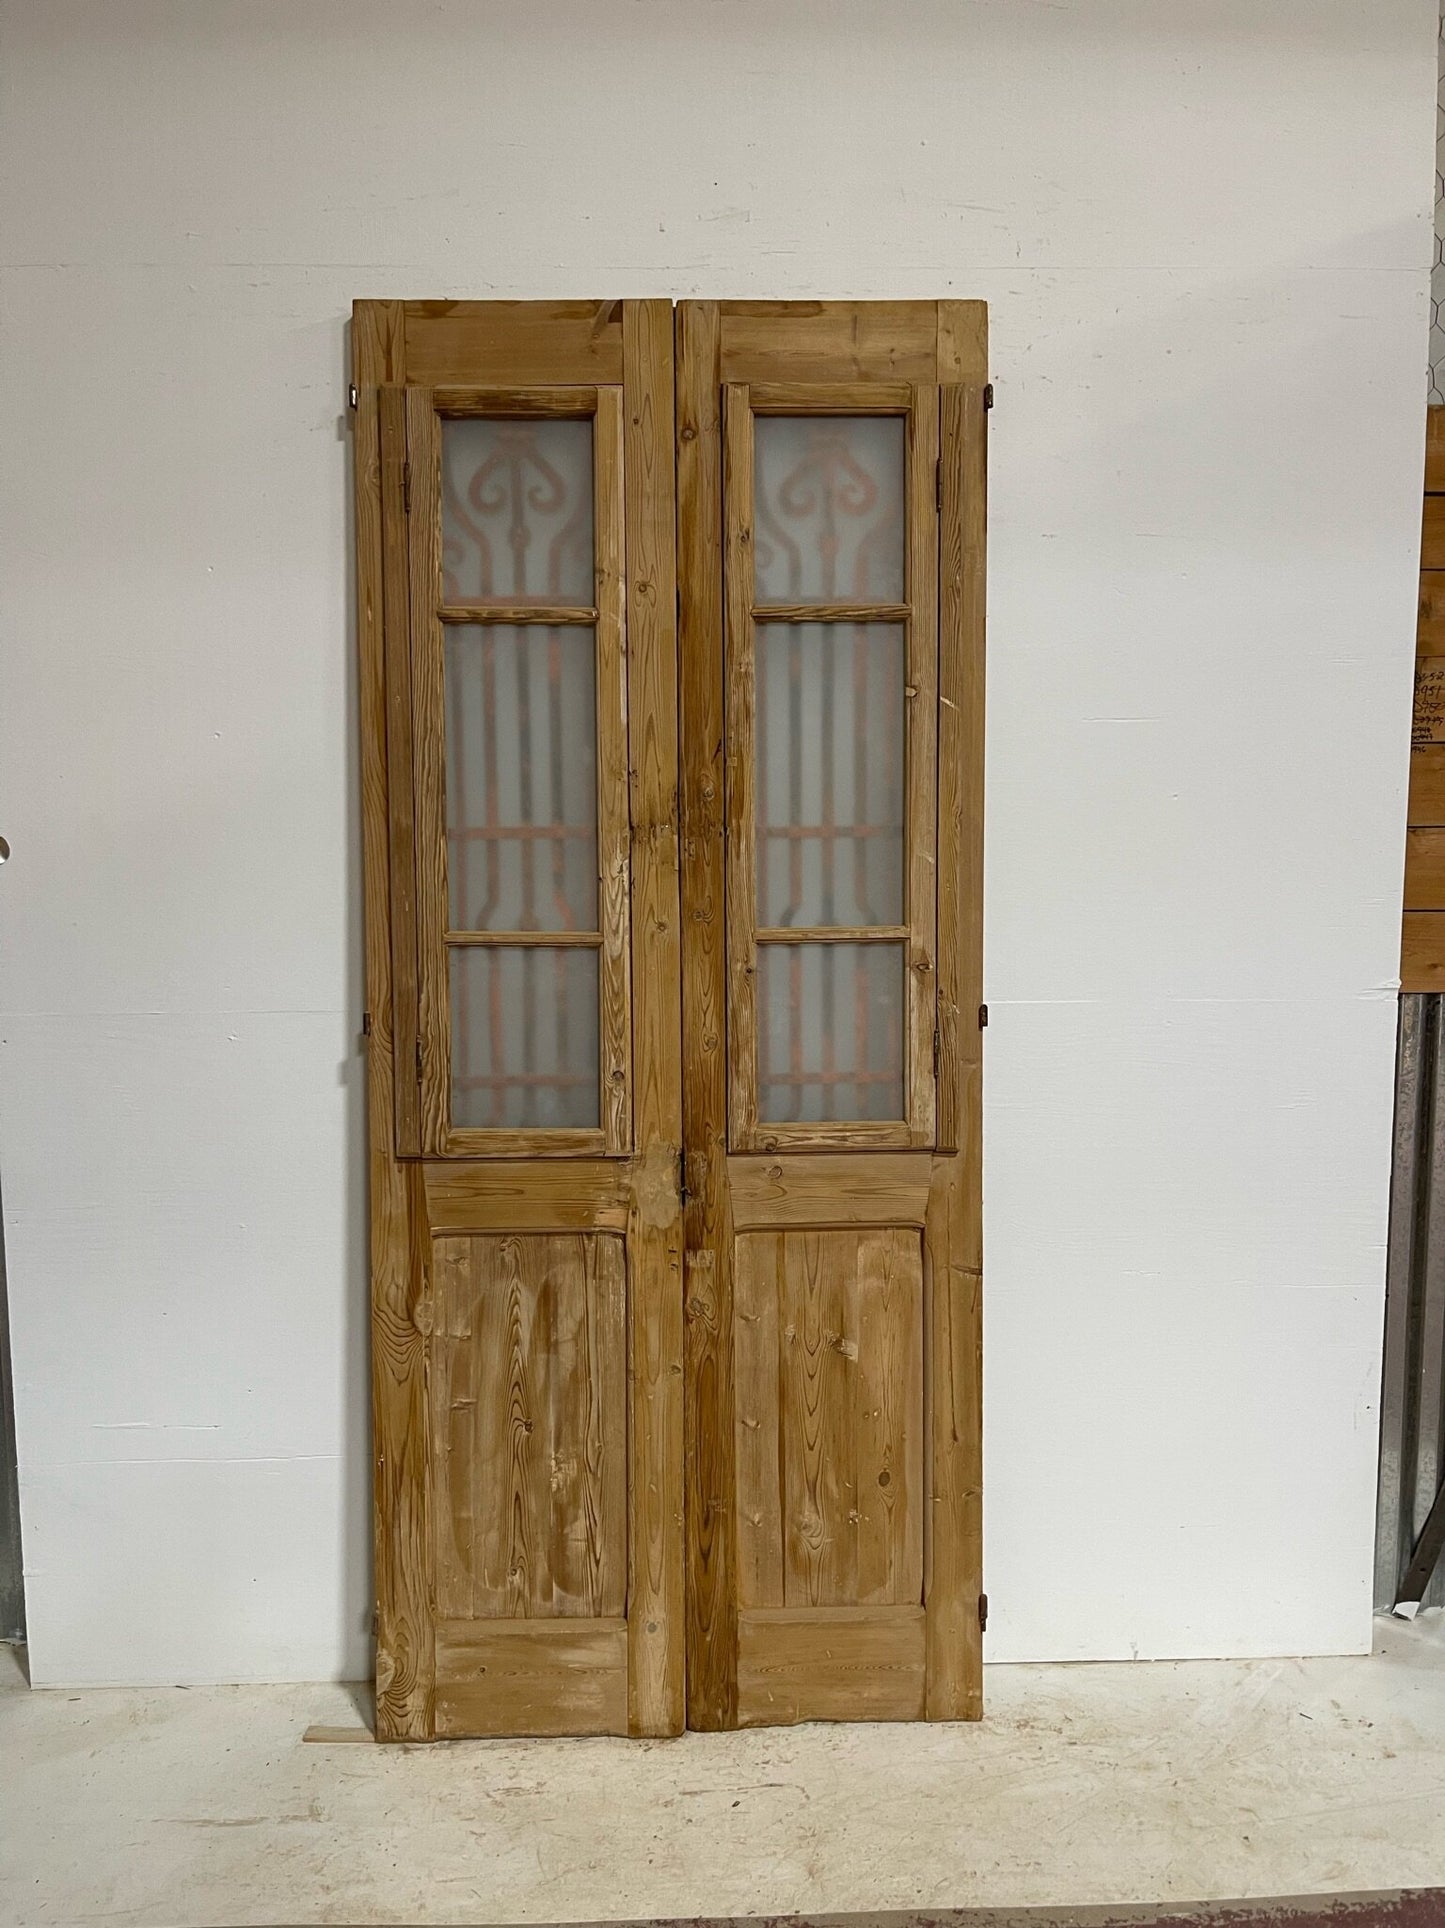 Antique French doors (93X40.25) with metal G1030